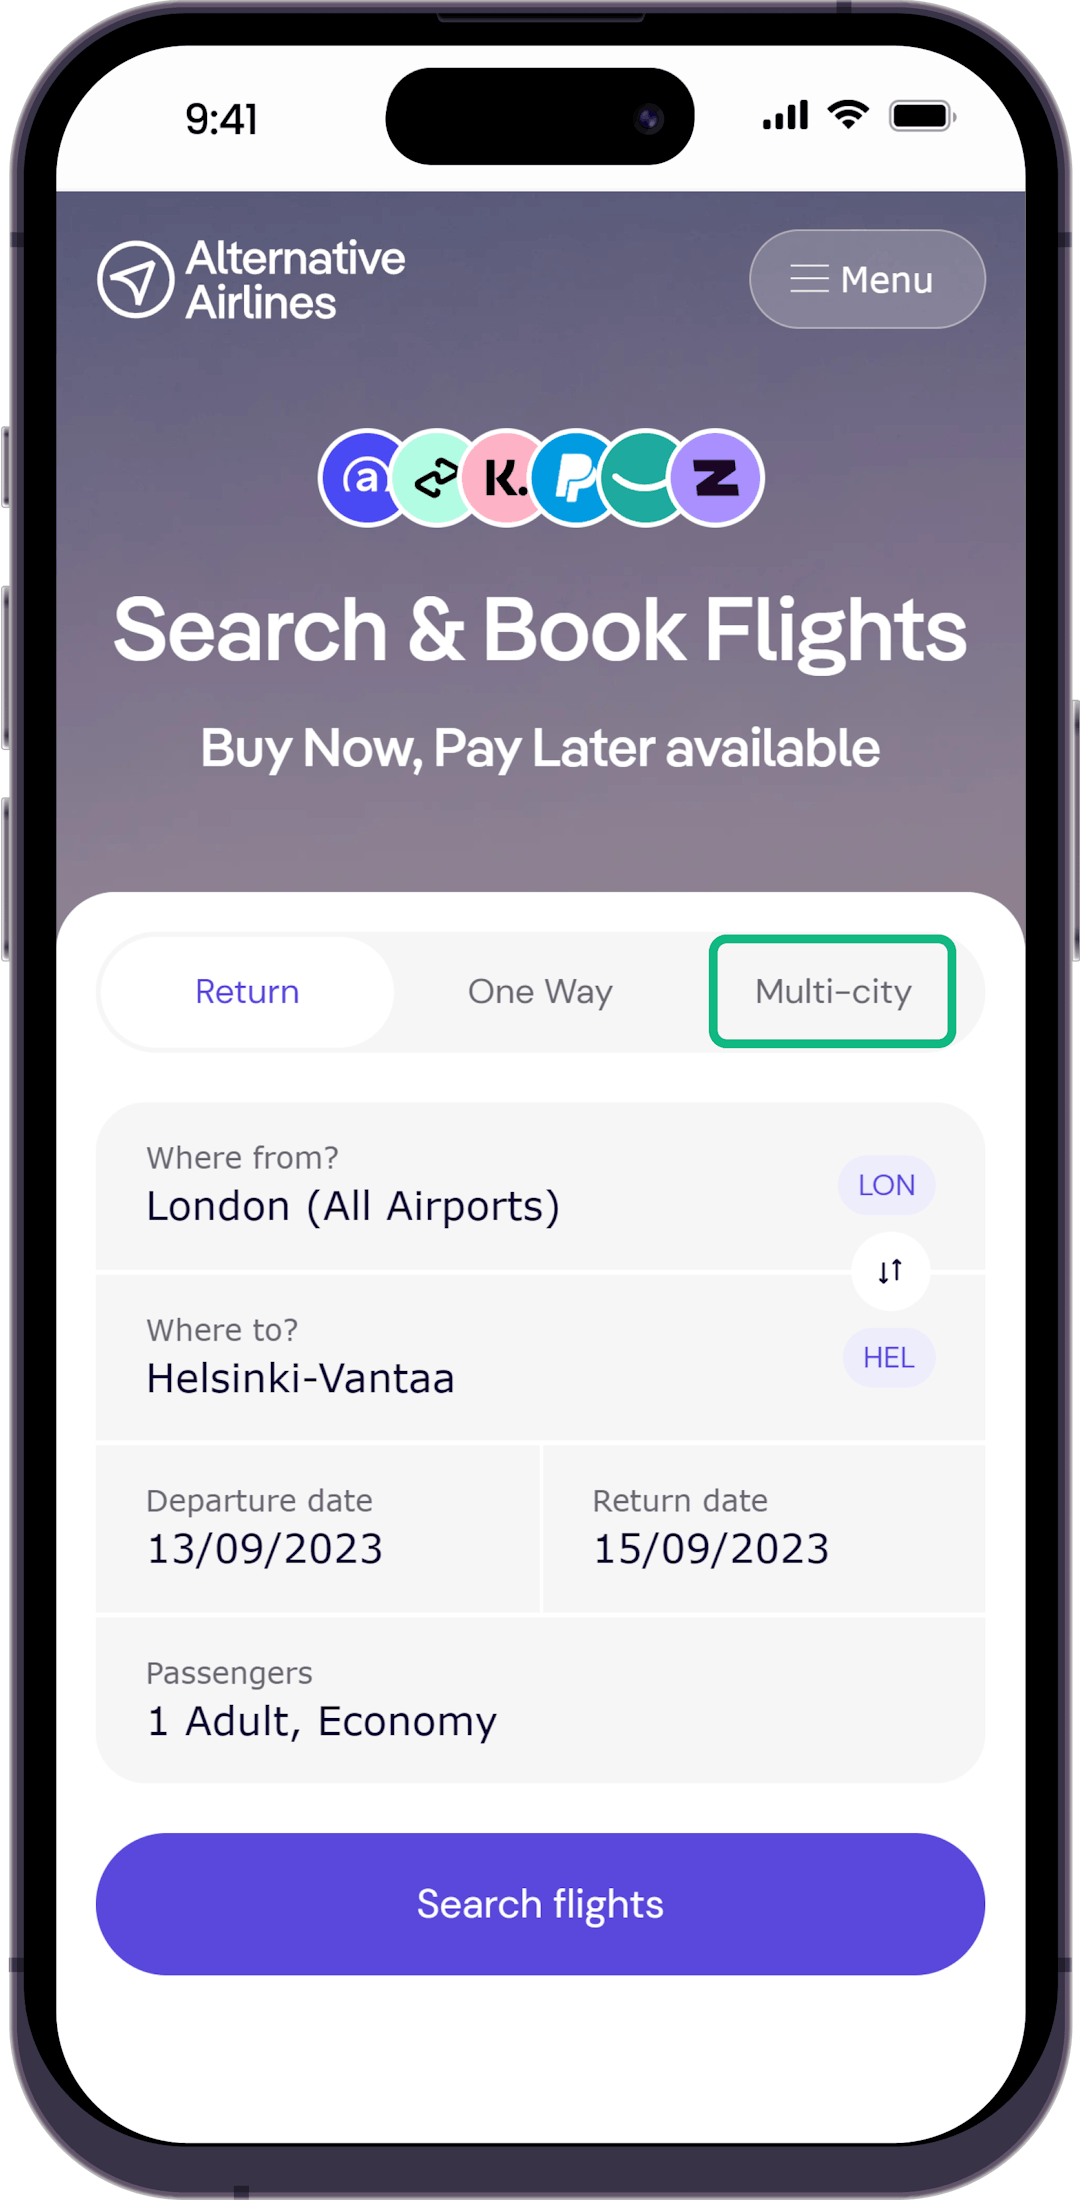 Step 1 - Select multi-city option in the search form